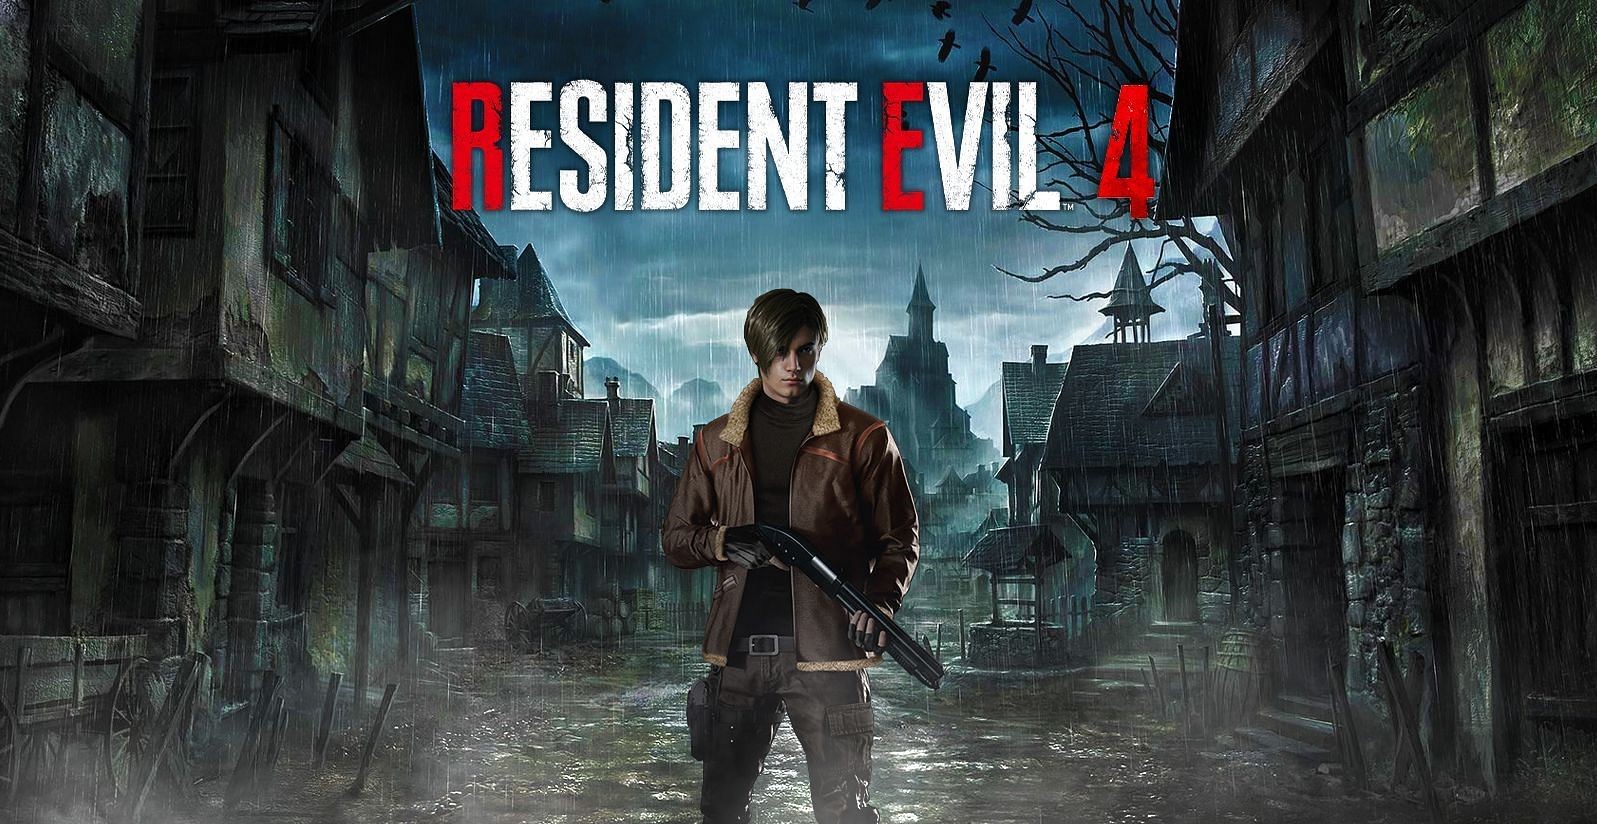 Is resident evil 4 on steam фото 63